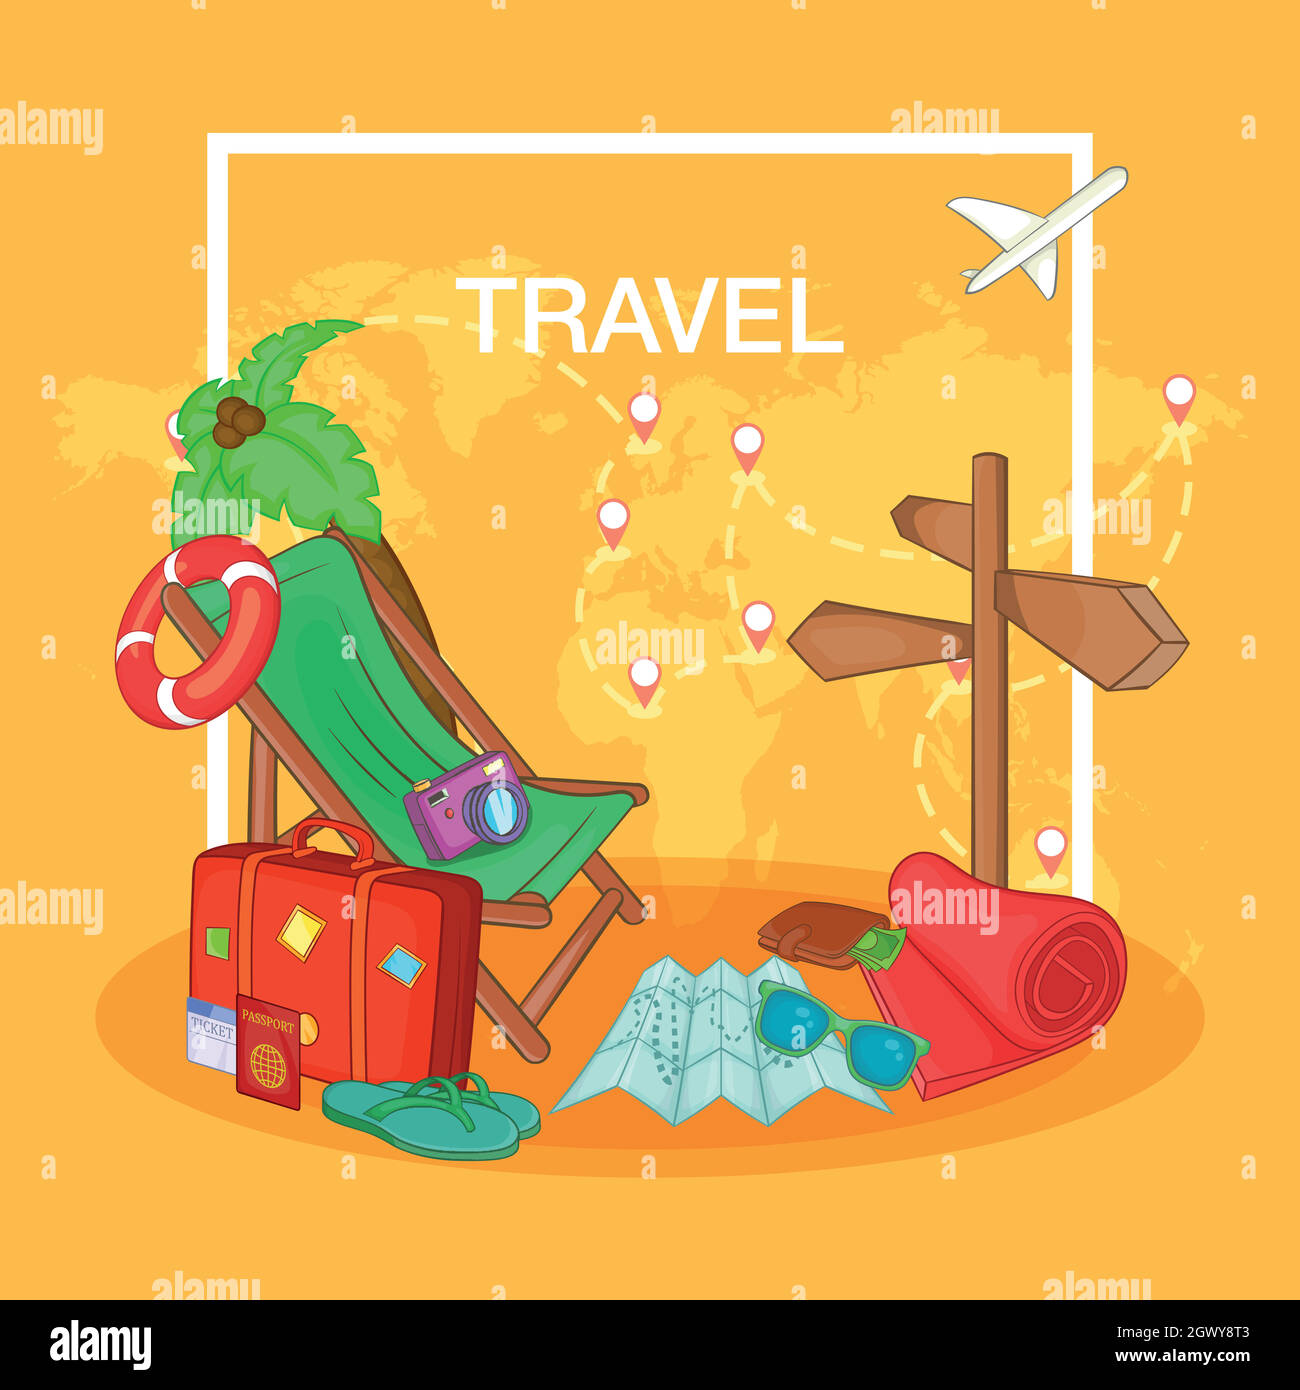 Travel concept route, cartoon style Stock Vector